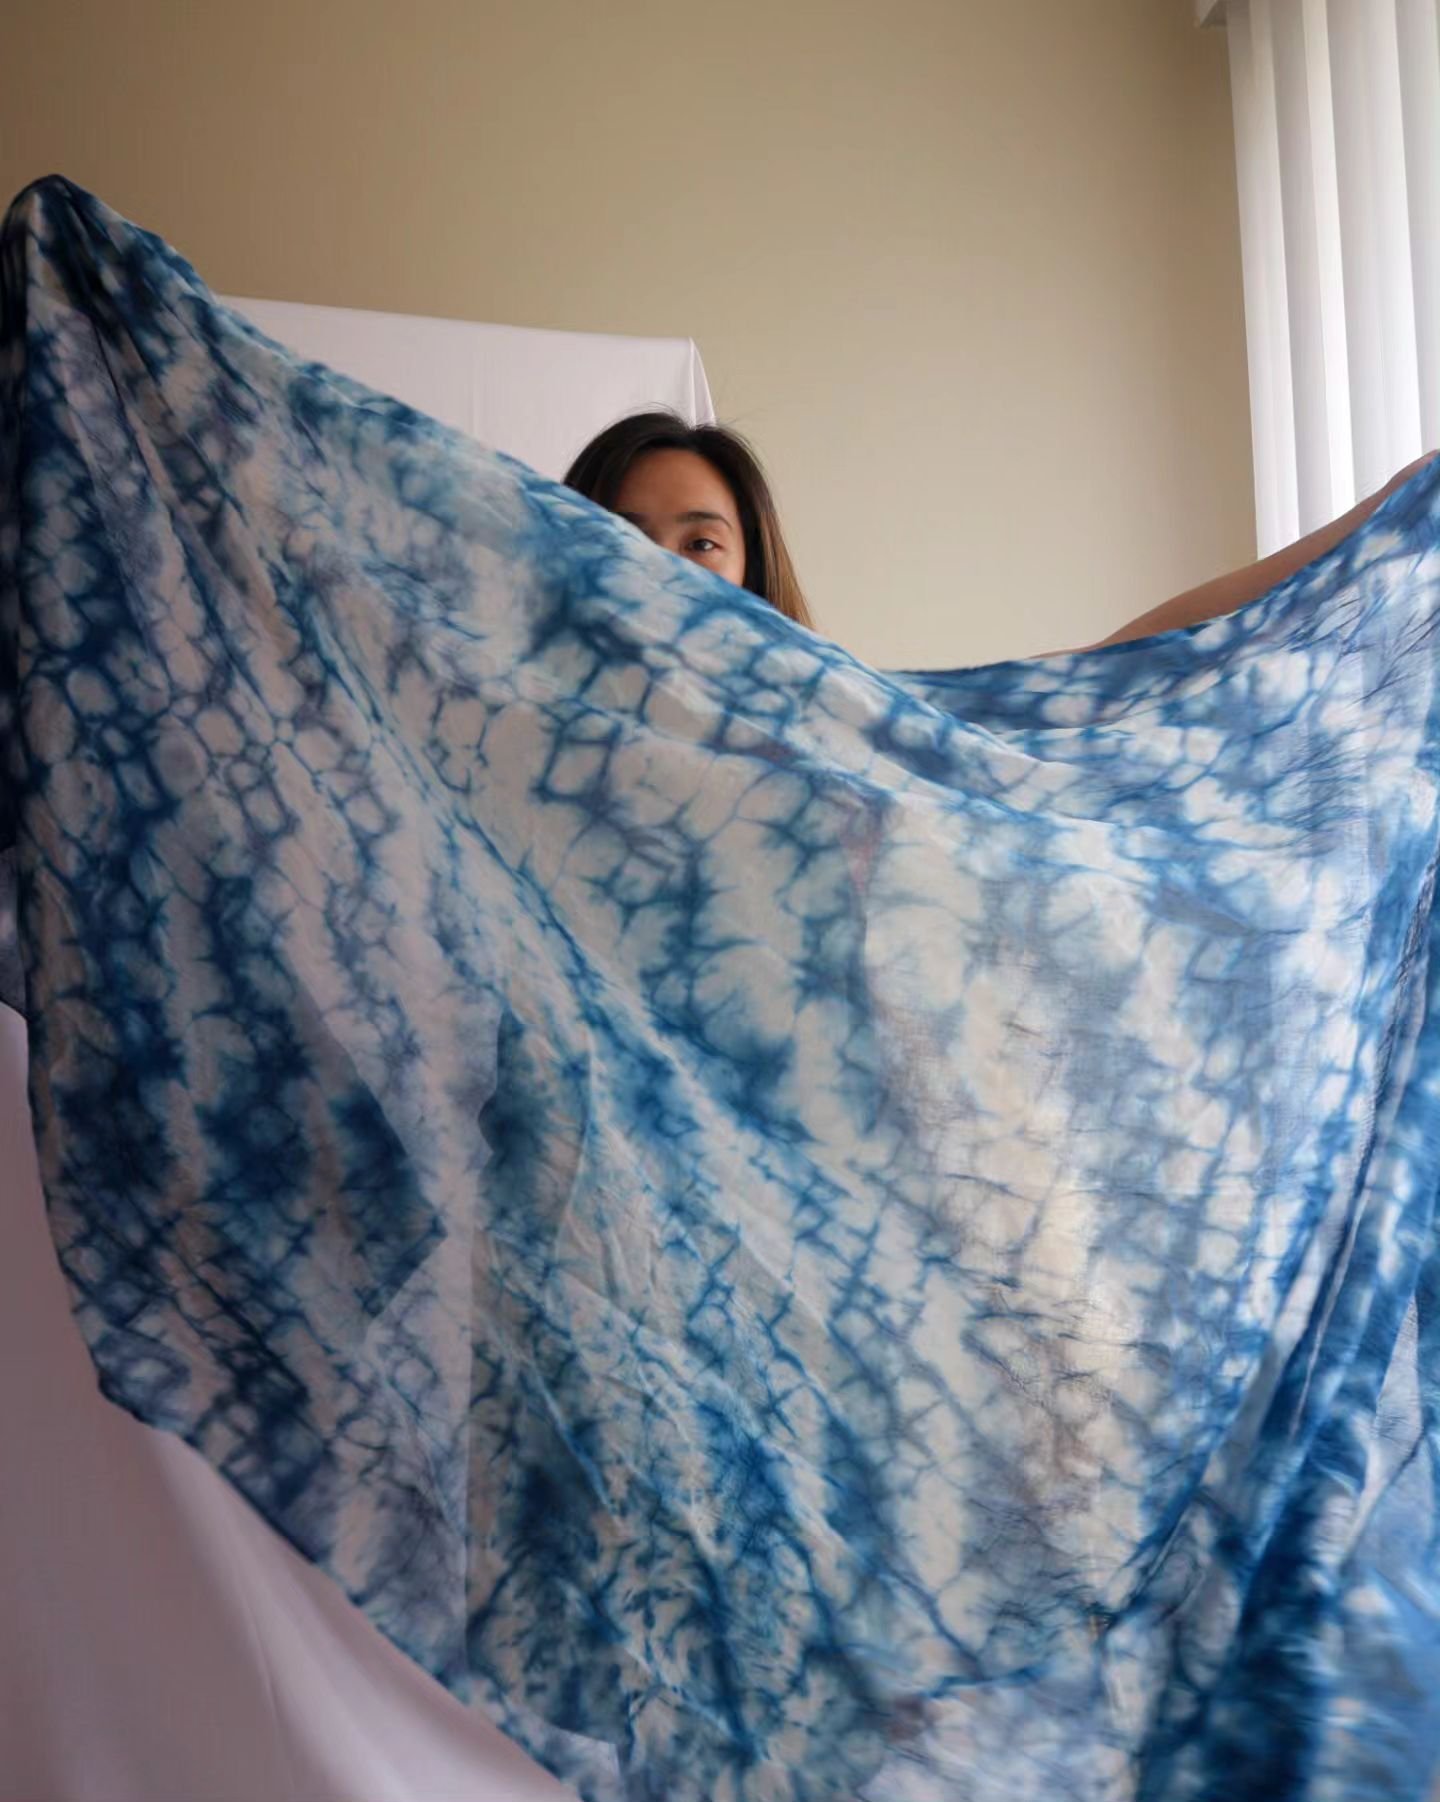 Hey! Looking for a last minute Mother's Day gift? Two spots left for the Indigo Dyeing Experience on May 18th. Learn about surface design techniques and create your own wearable art. DM mothersday and I'll send you the link.

Calendar update:
(Full) 